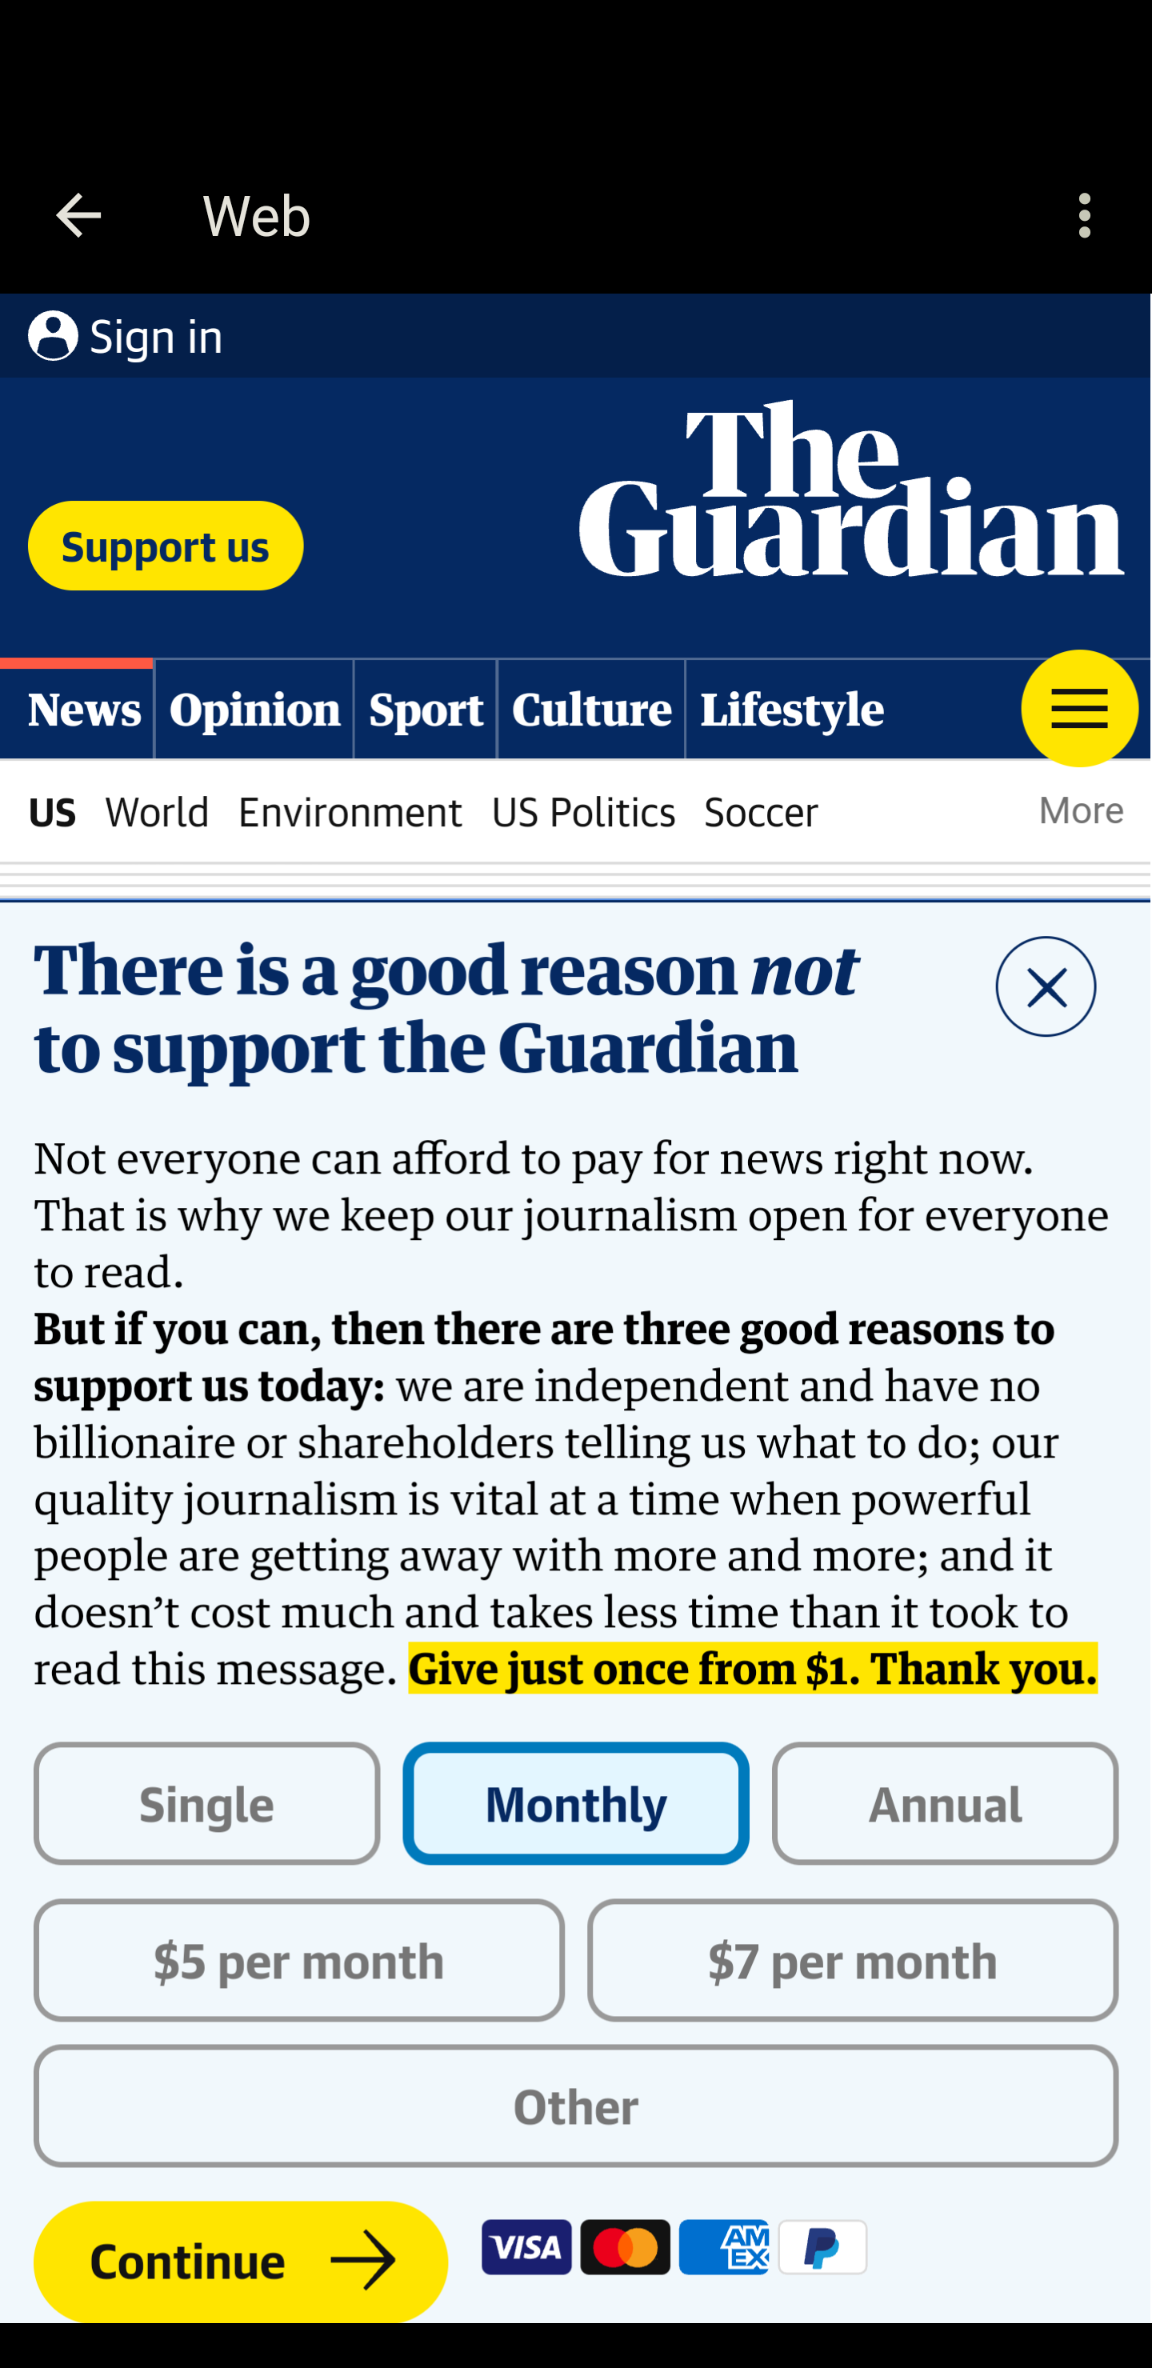 A screenshot of the Guardian's website with a pop up asking for an optional donation, with the monthly option selected by default.